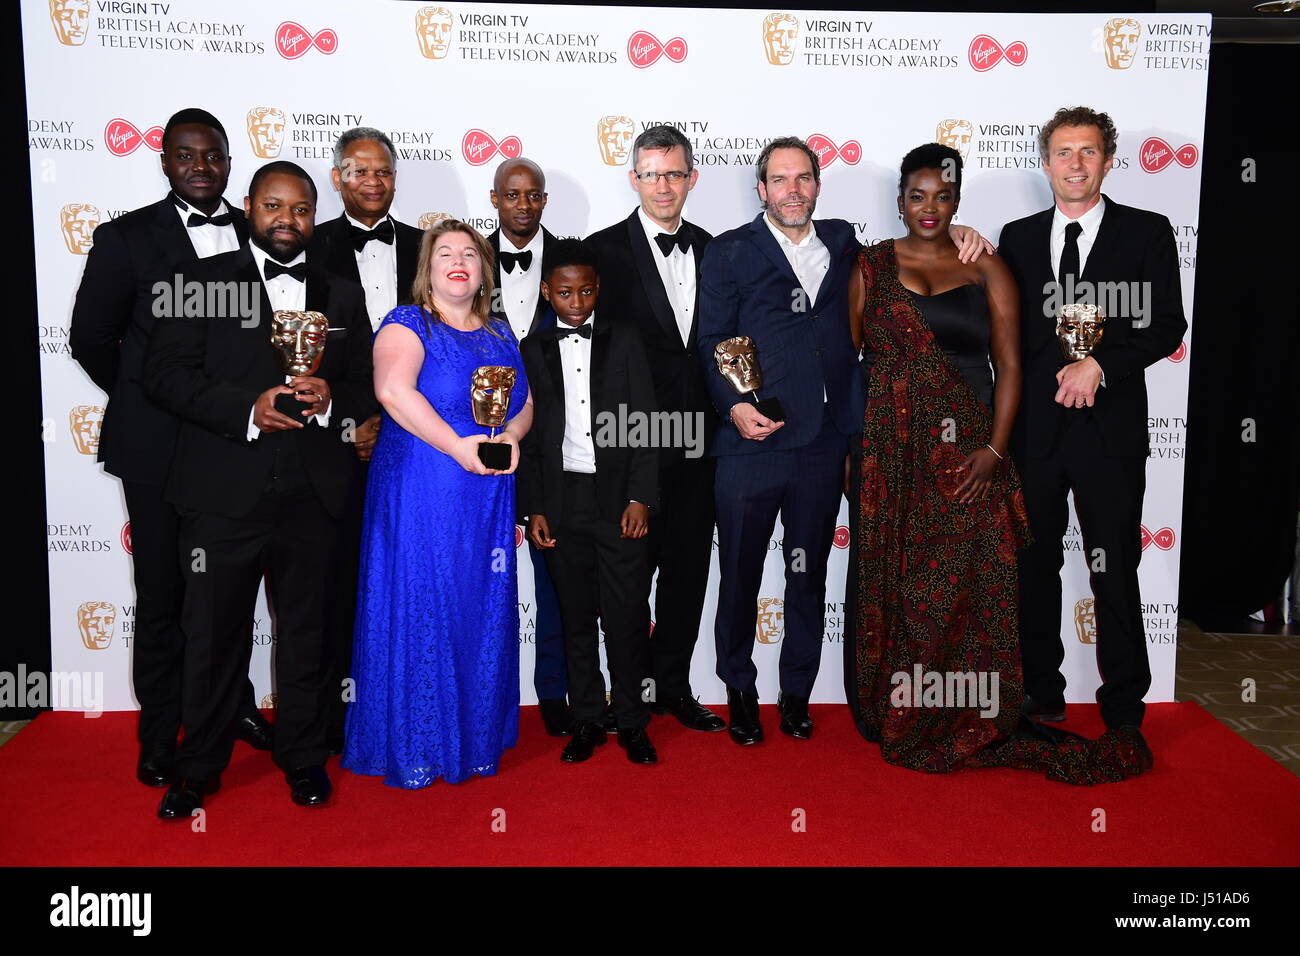 Babou Ceesay, Levi David Addai, Richard Taylor, Susan Horth, Sammy Kamara, Tunder Taylor, Adrian Kelly, Colin Barr and Wunmi Mosaku with the award for Best Single Drama in the press room at the Virgin TV British Academy Television Awards 2017 held at Festival Hall at Southbank Centre, London. PRESS ASSOCIATION Photo. Picture date: Sunday May 14, 2017. See PA story SHOWBIZ Bafta. Photo credit should read: Ian West/PA Wire Stock Photo